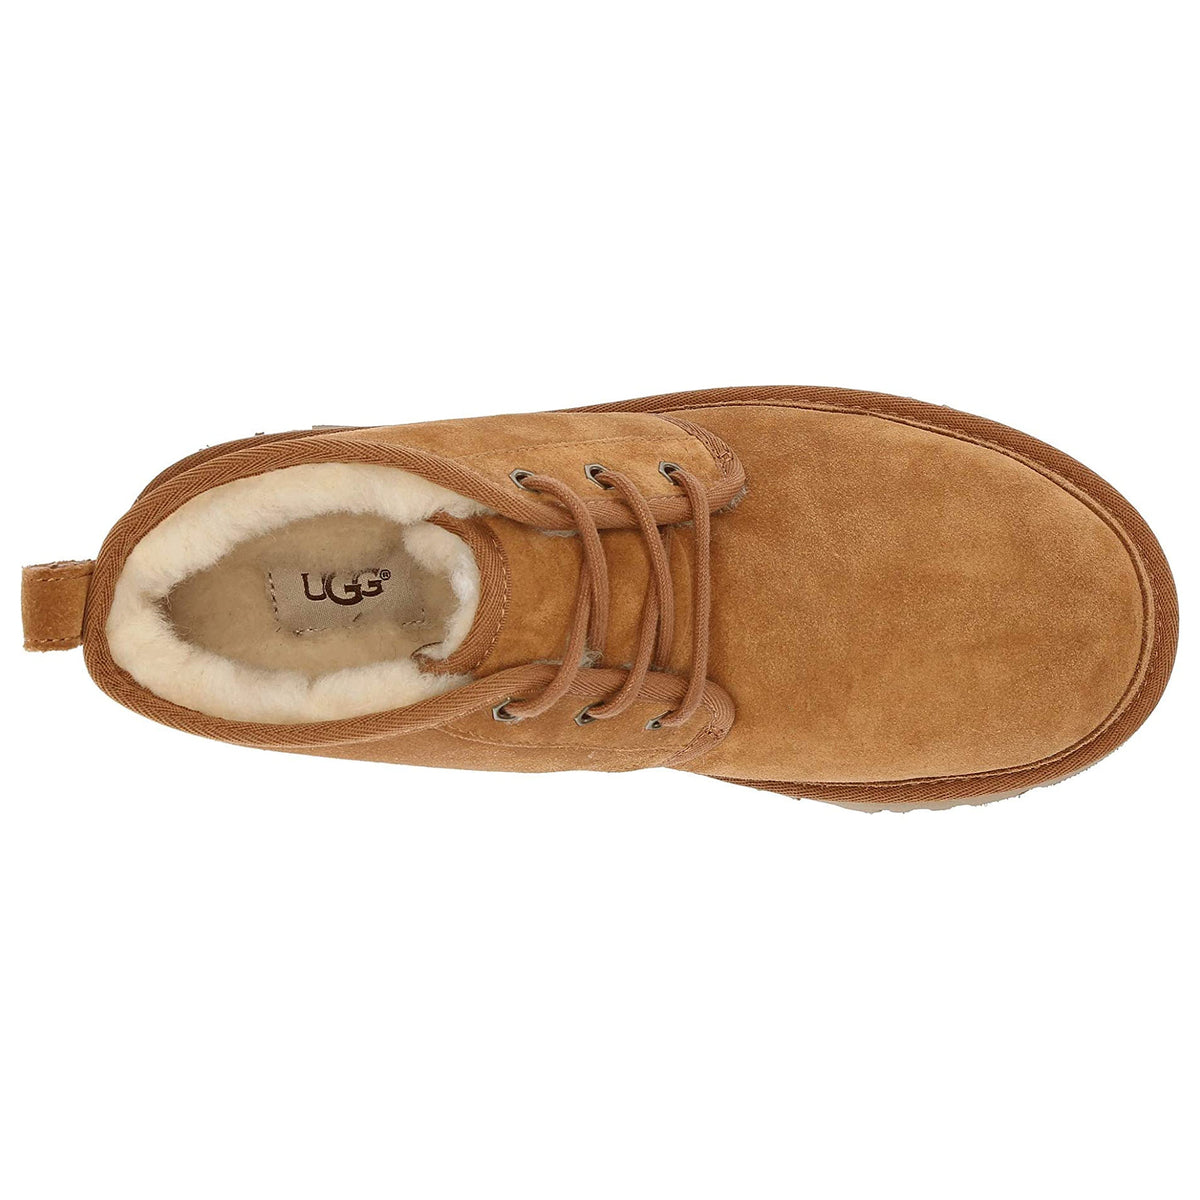 Top view of a single suede UGG Neumel chestnut chukka boot with laces, shearling-lined.